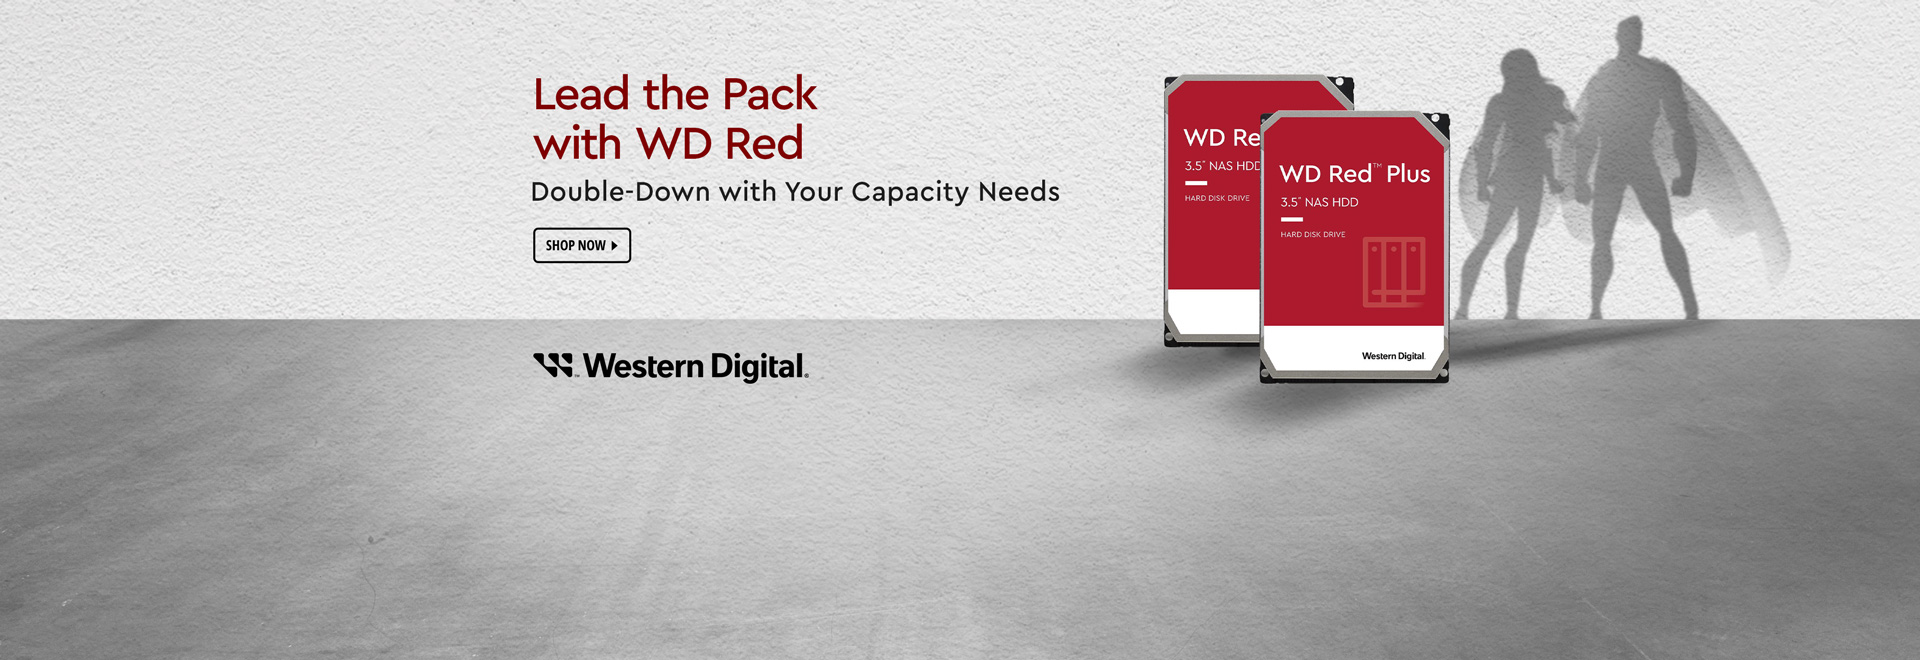 Lead the Pack with WD Red